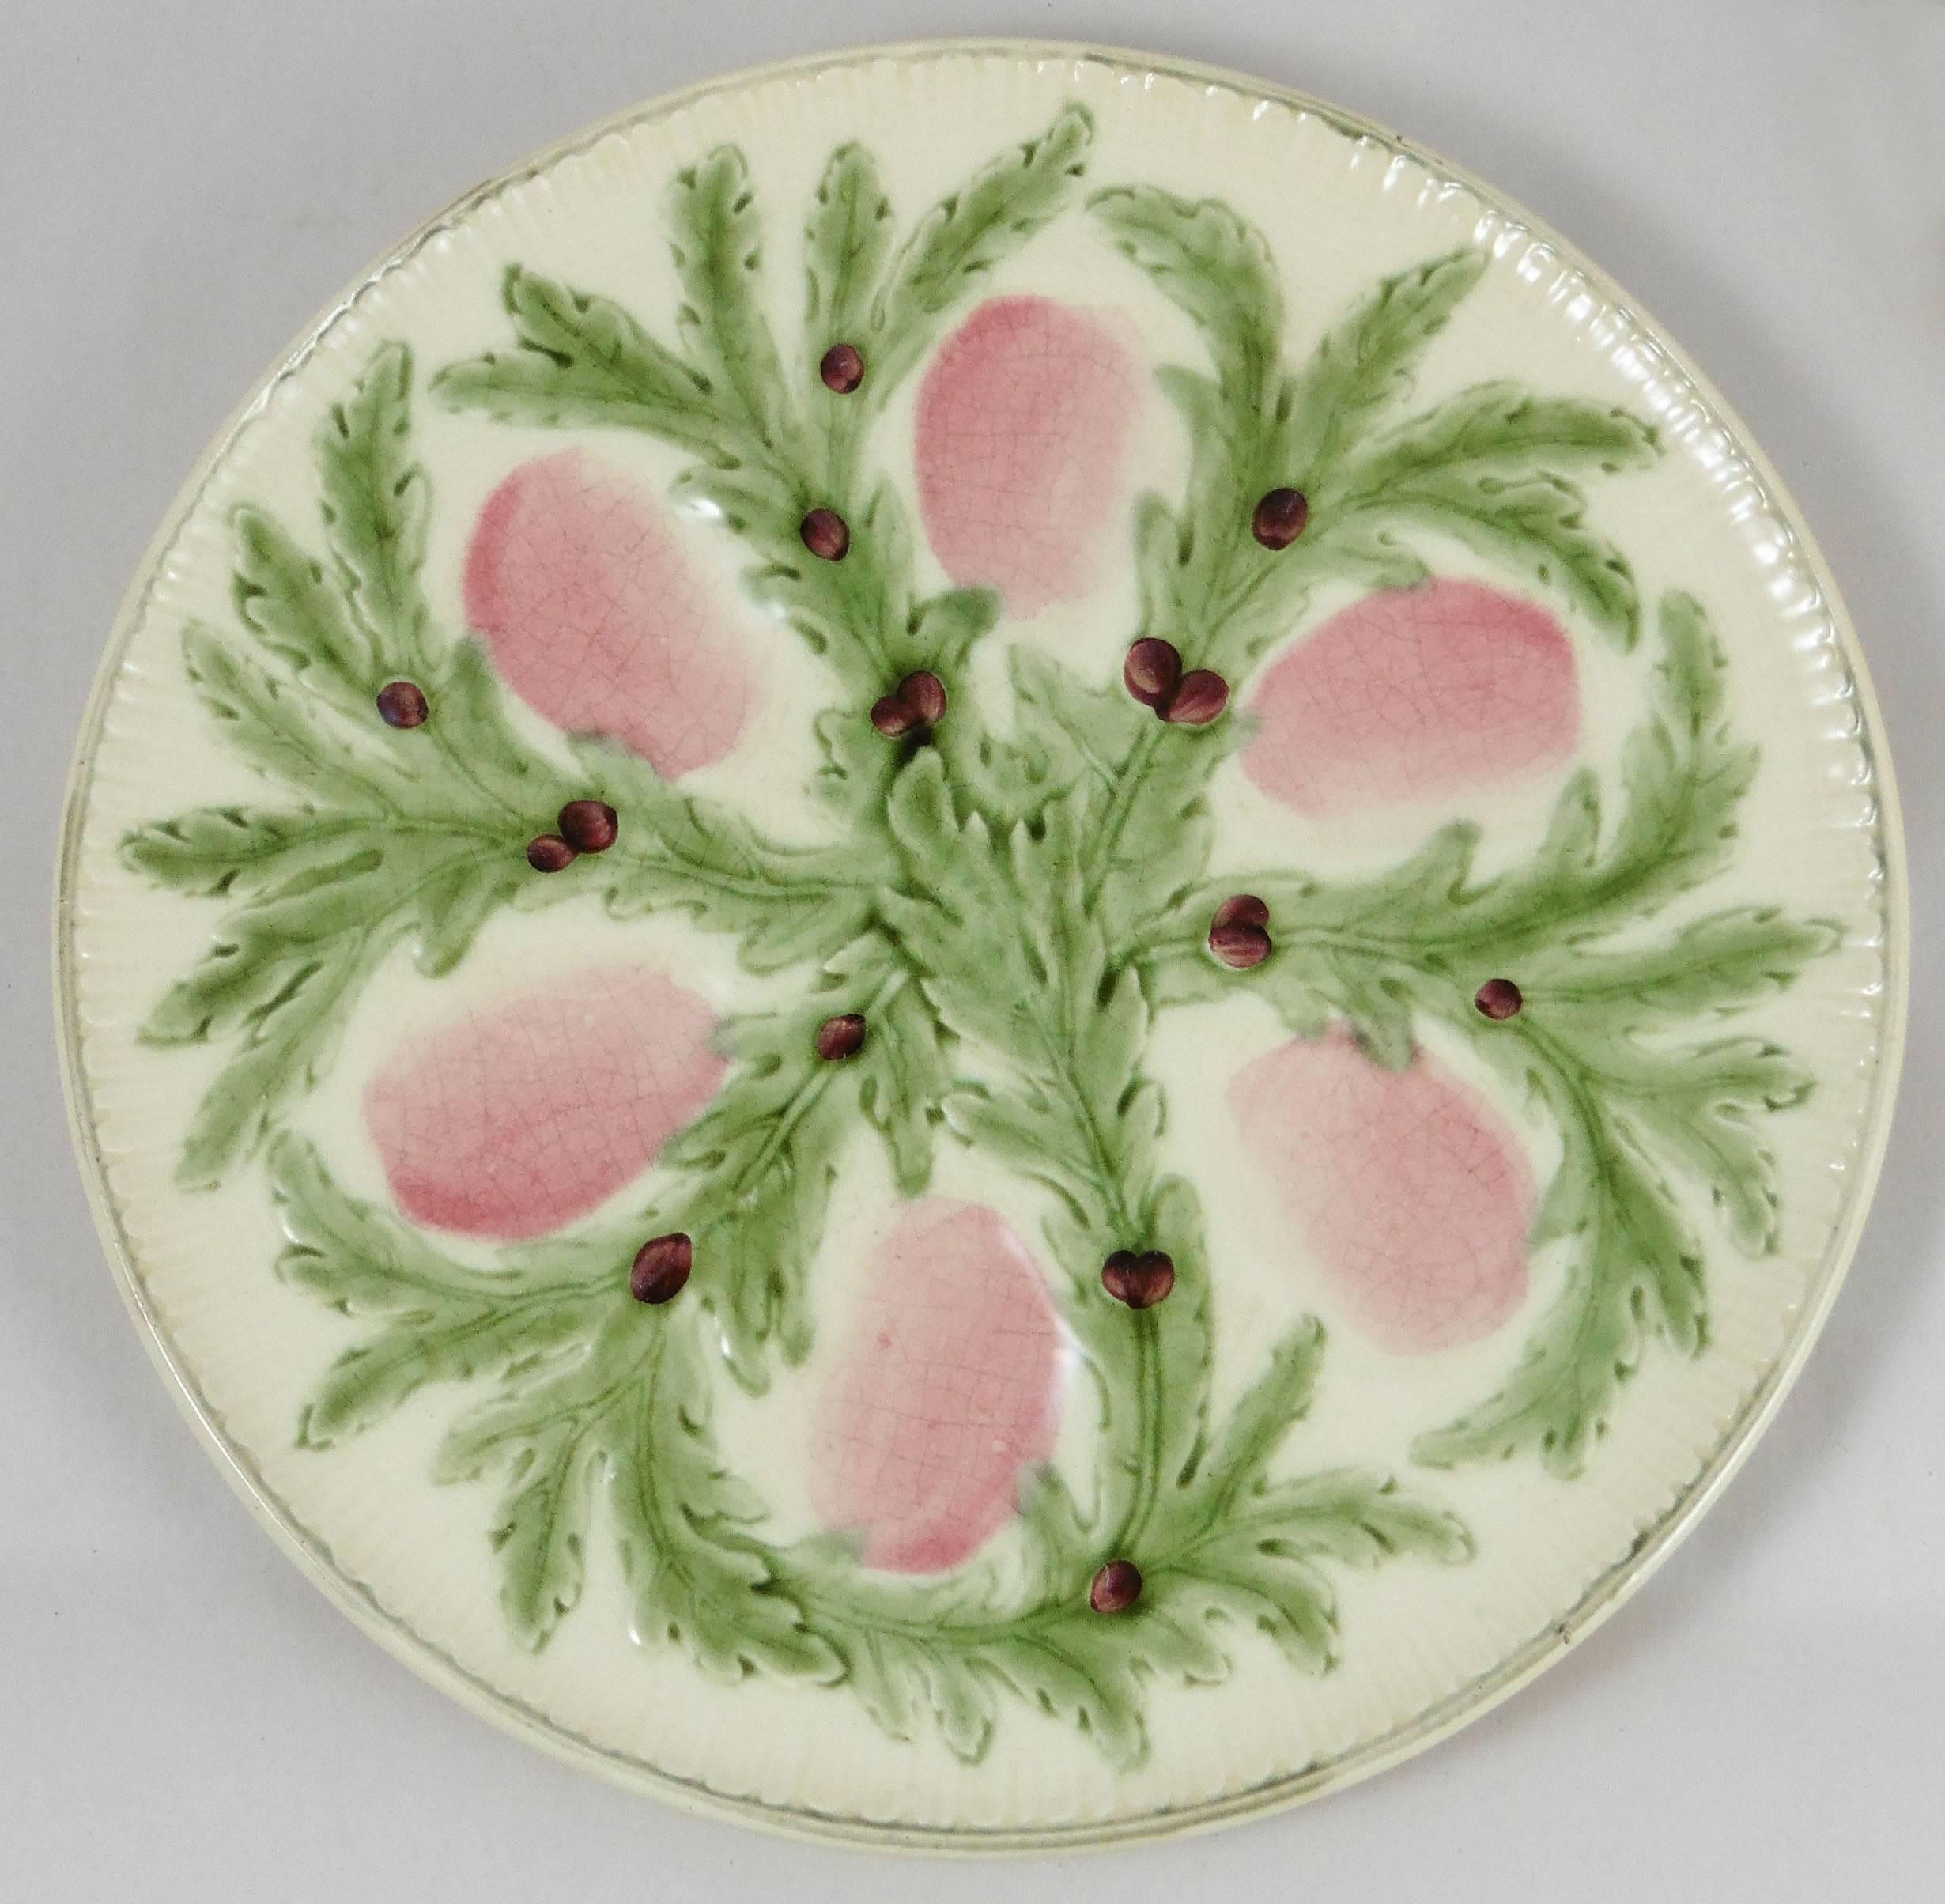 Very decorative Majolica oyster plate signed Hippolyte Boulenger Choisy le Roi. The six pink wells are surrounded by green seaweeds.